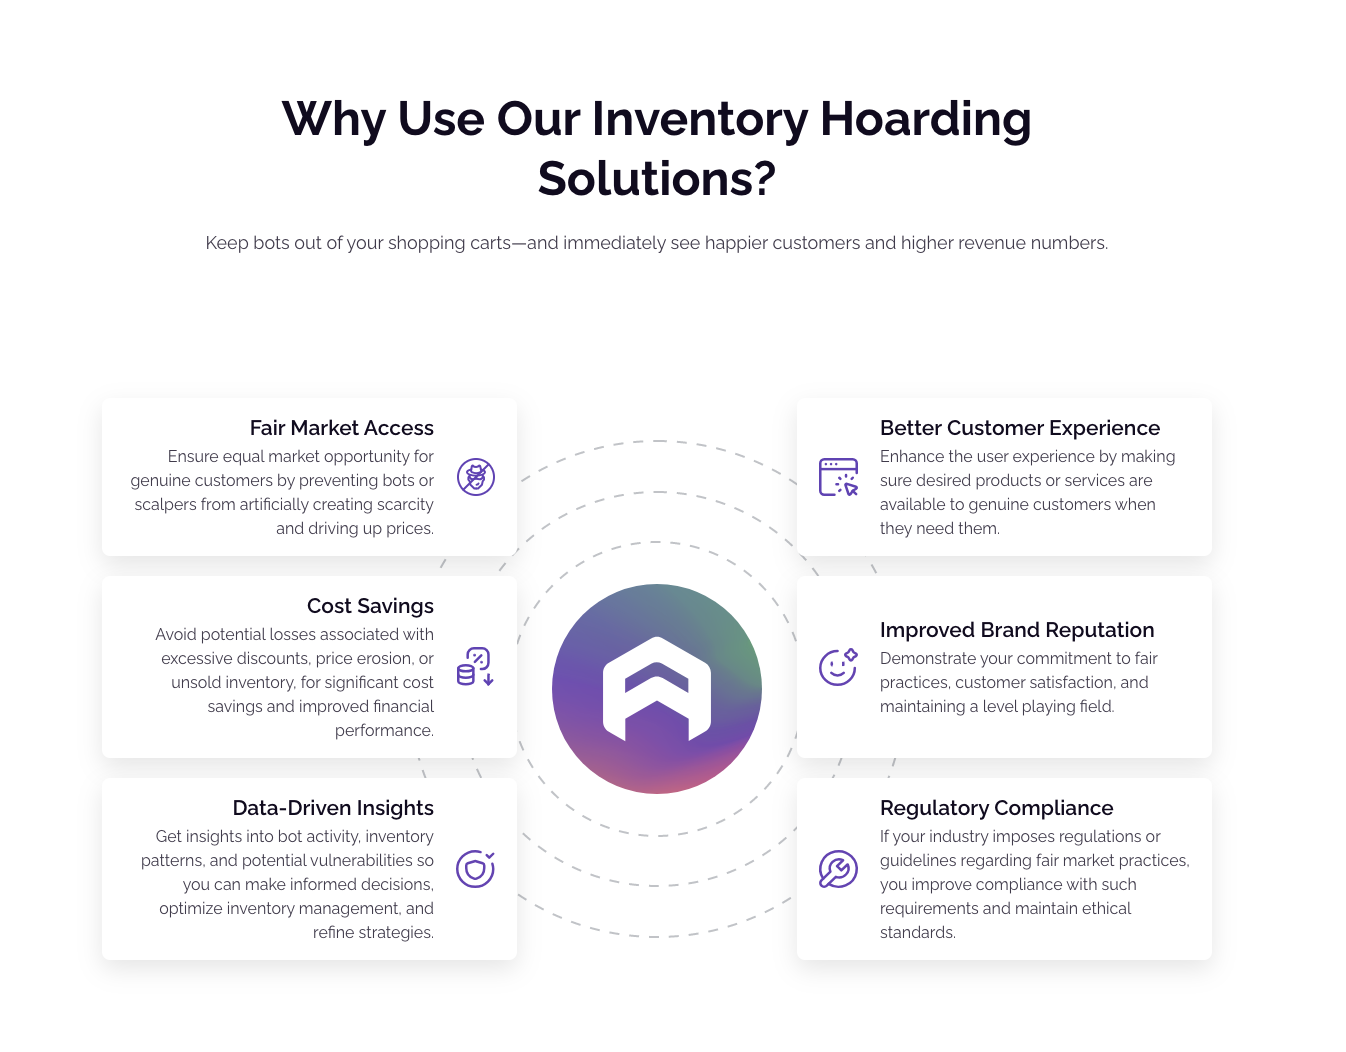 How Arkose Labs helps protect against inventory hoarding attacks